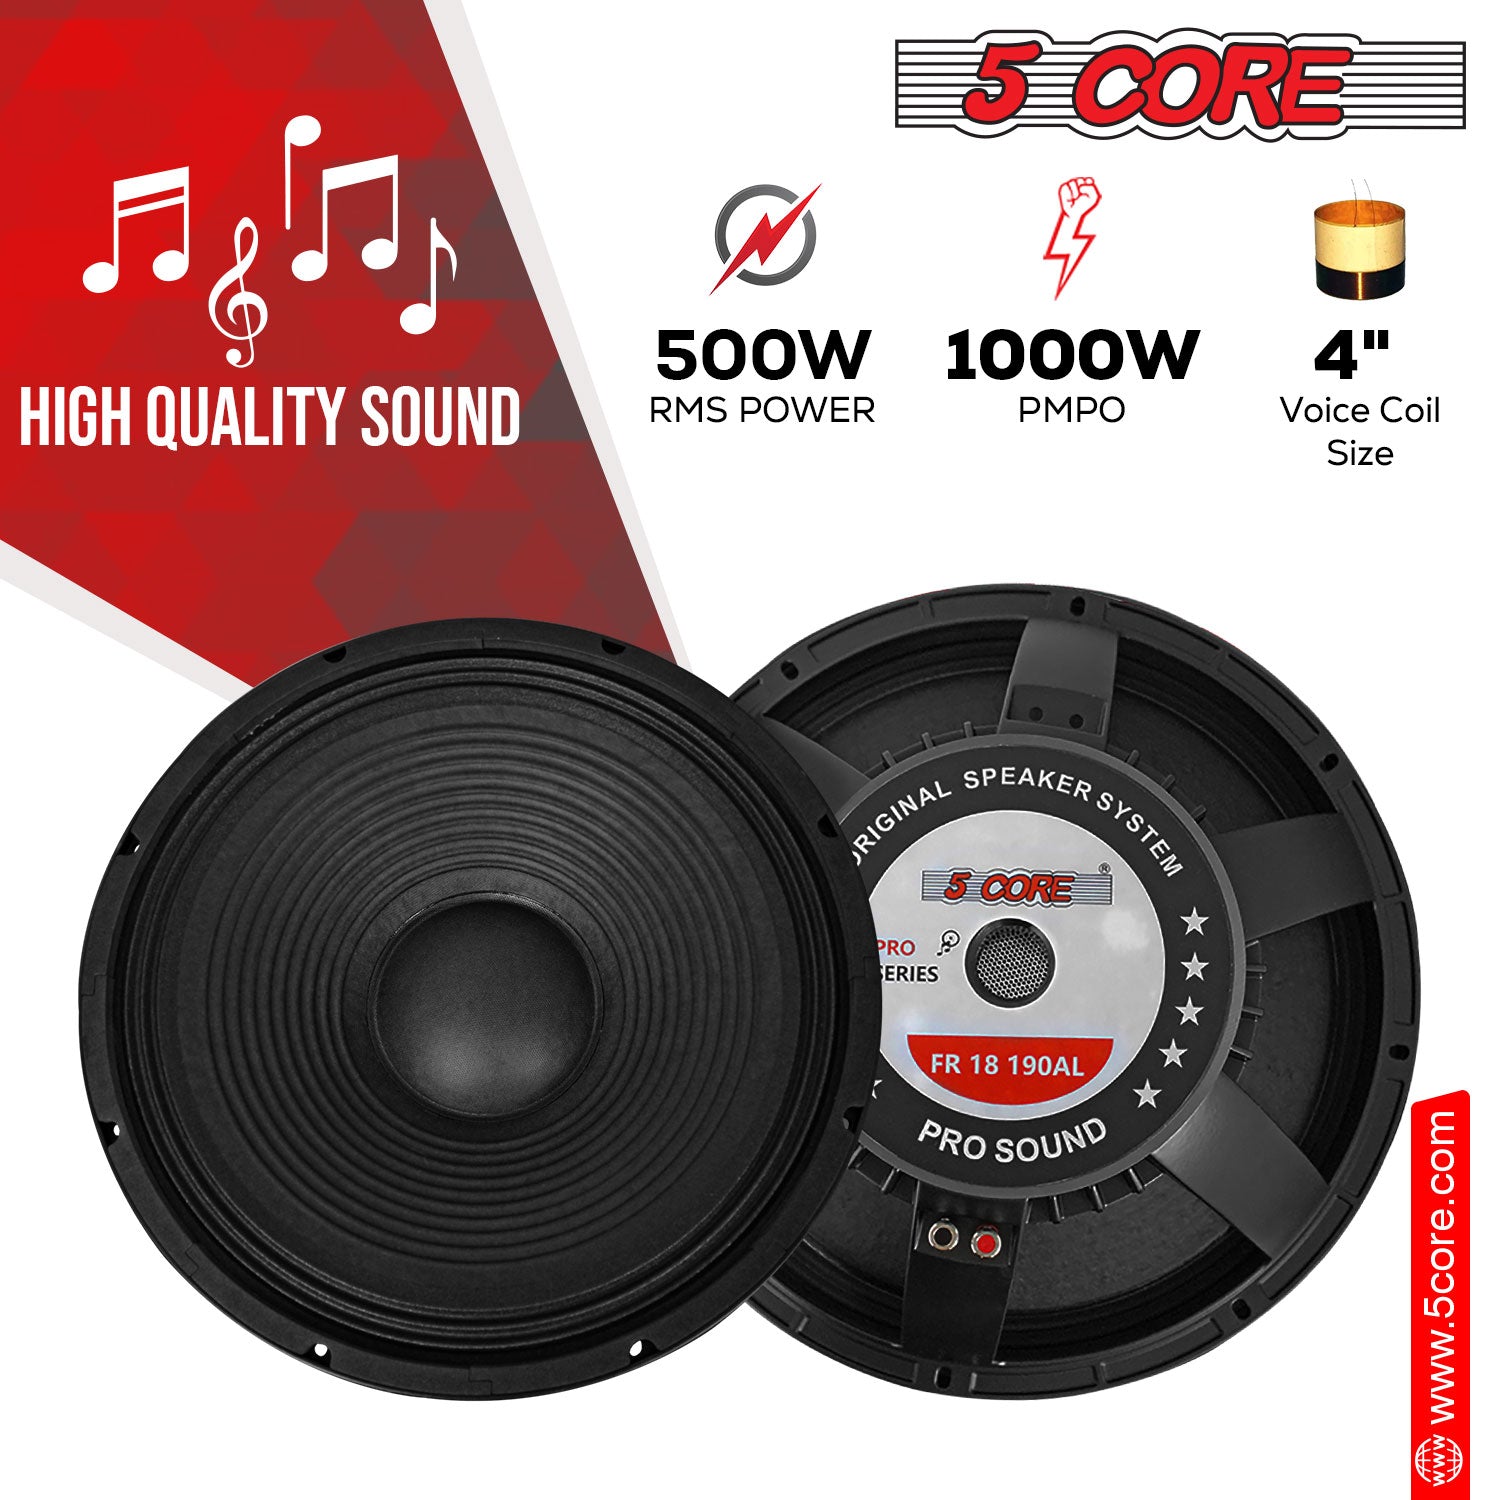 18" subwoofer with 1000w pmpo